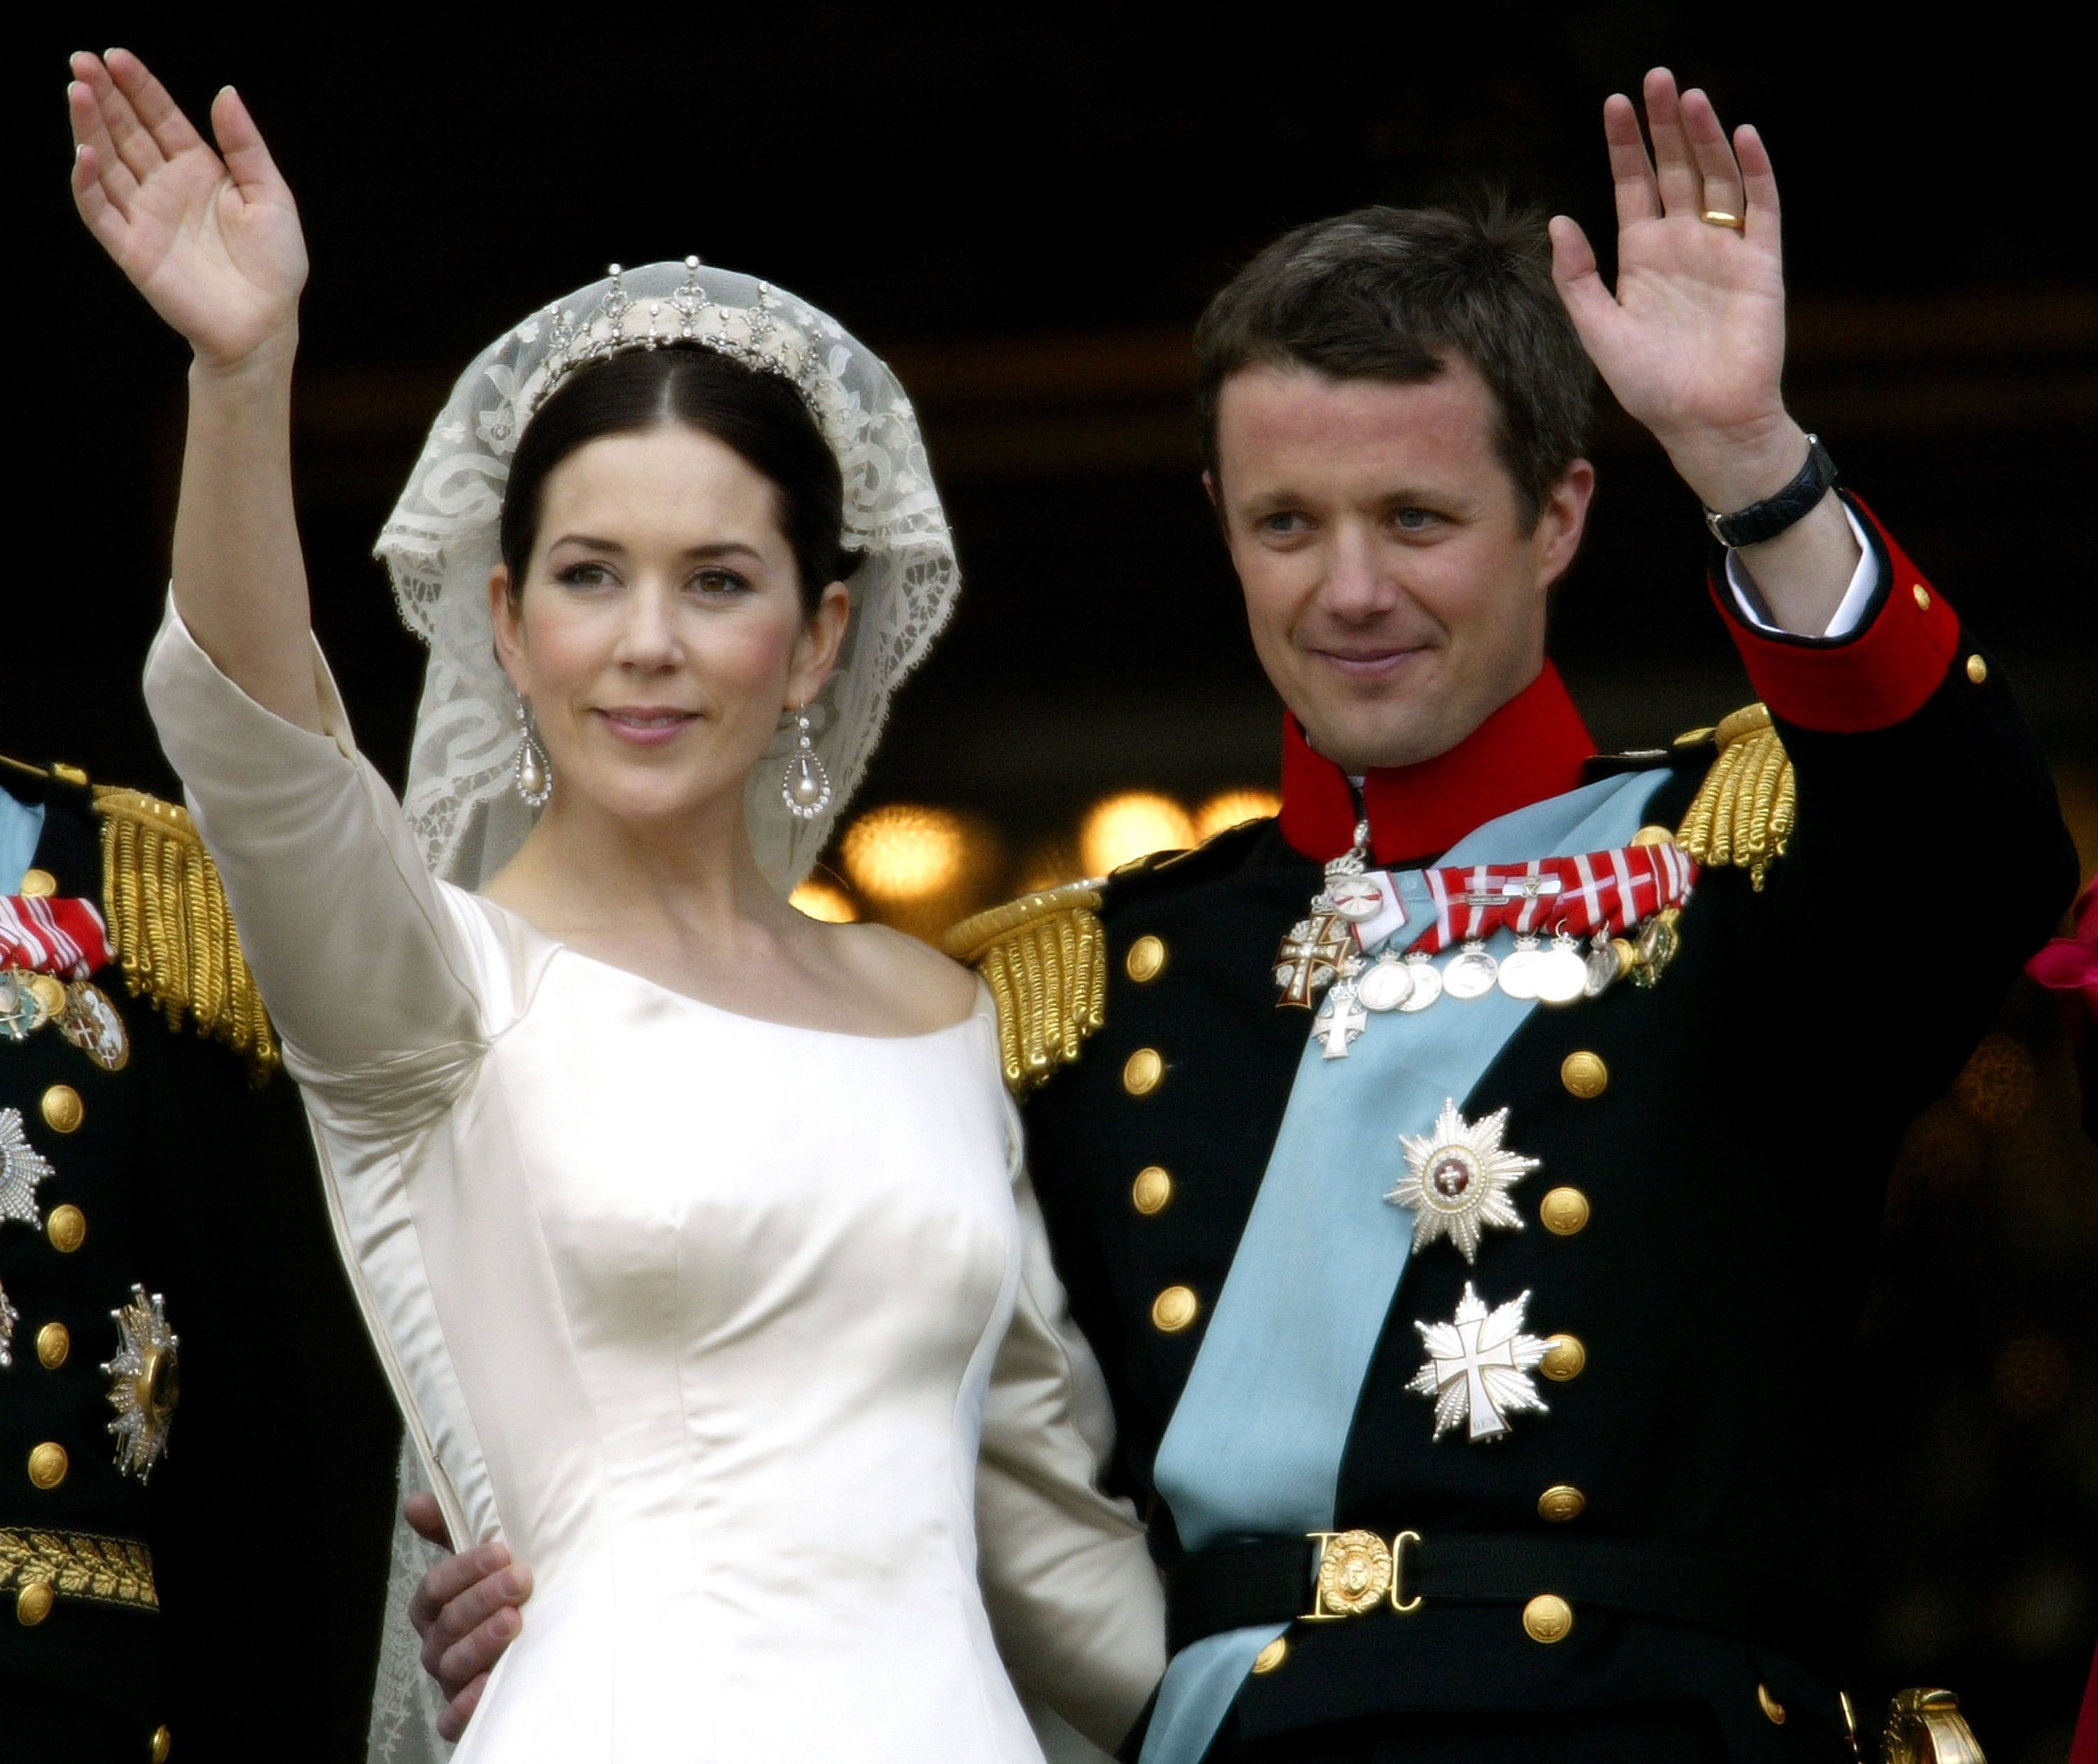 https://hips.hearstapps.com/hmg-prod/images/crown-princess-mary-and-crown-prince-frederik-of-denmark-news-photo-1704308697.jpg